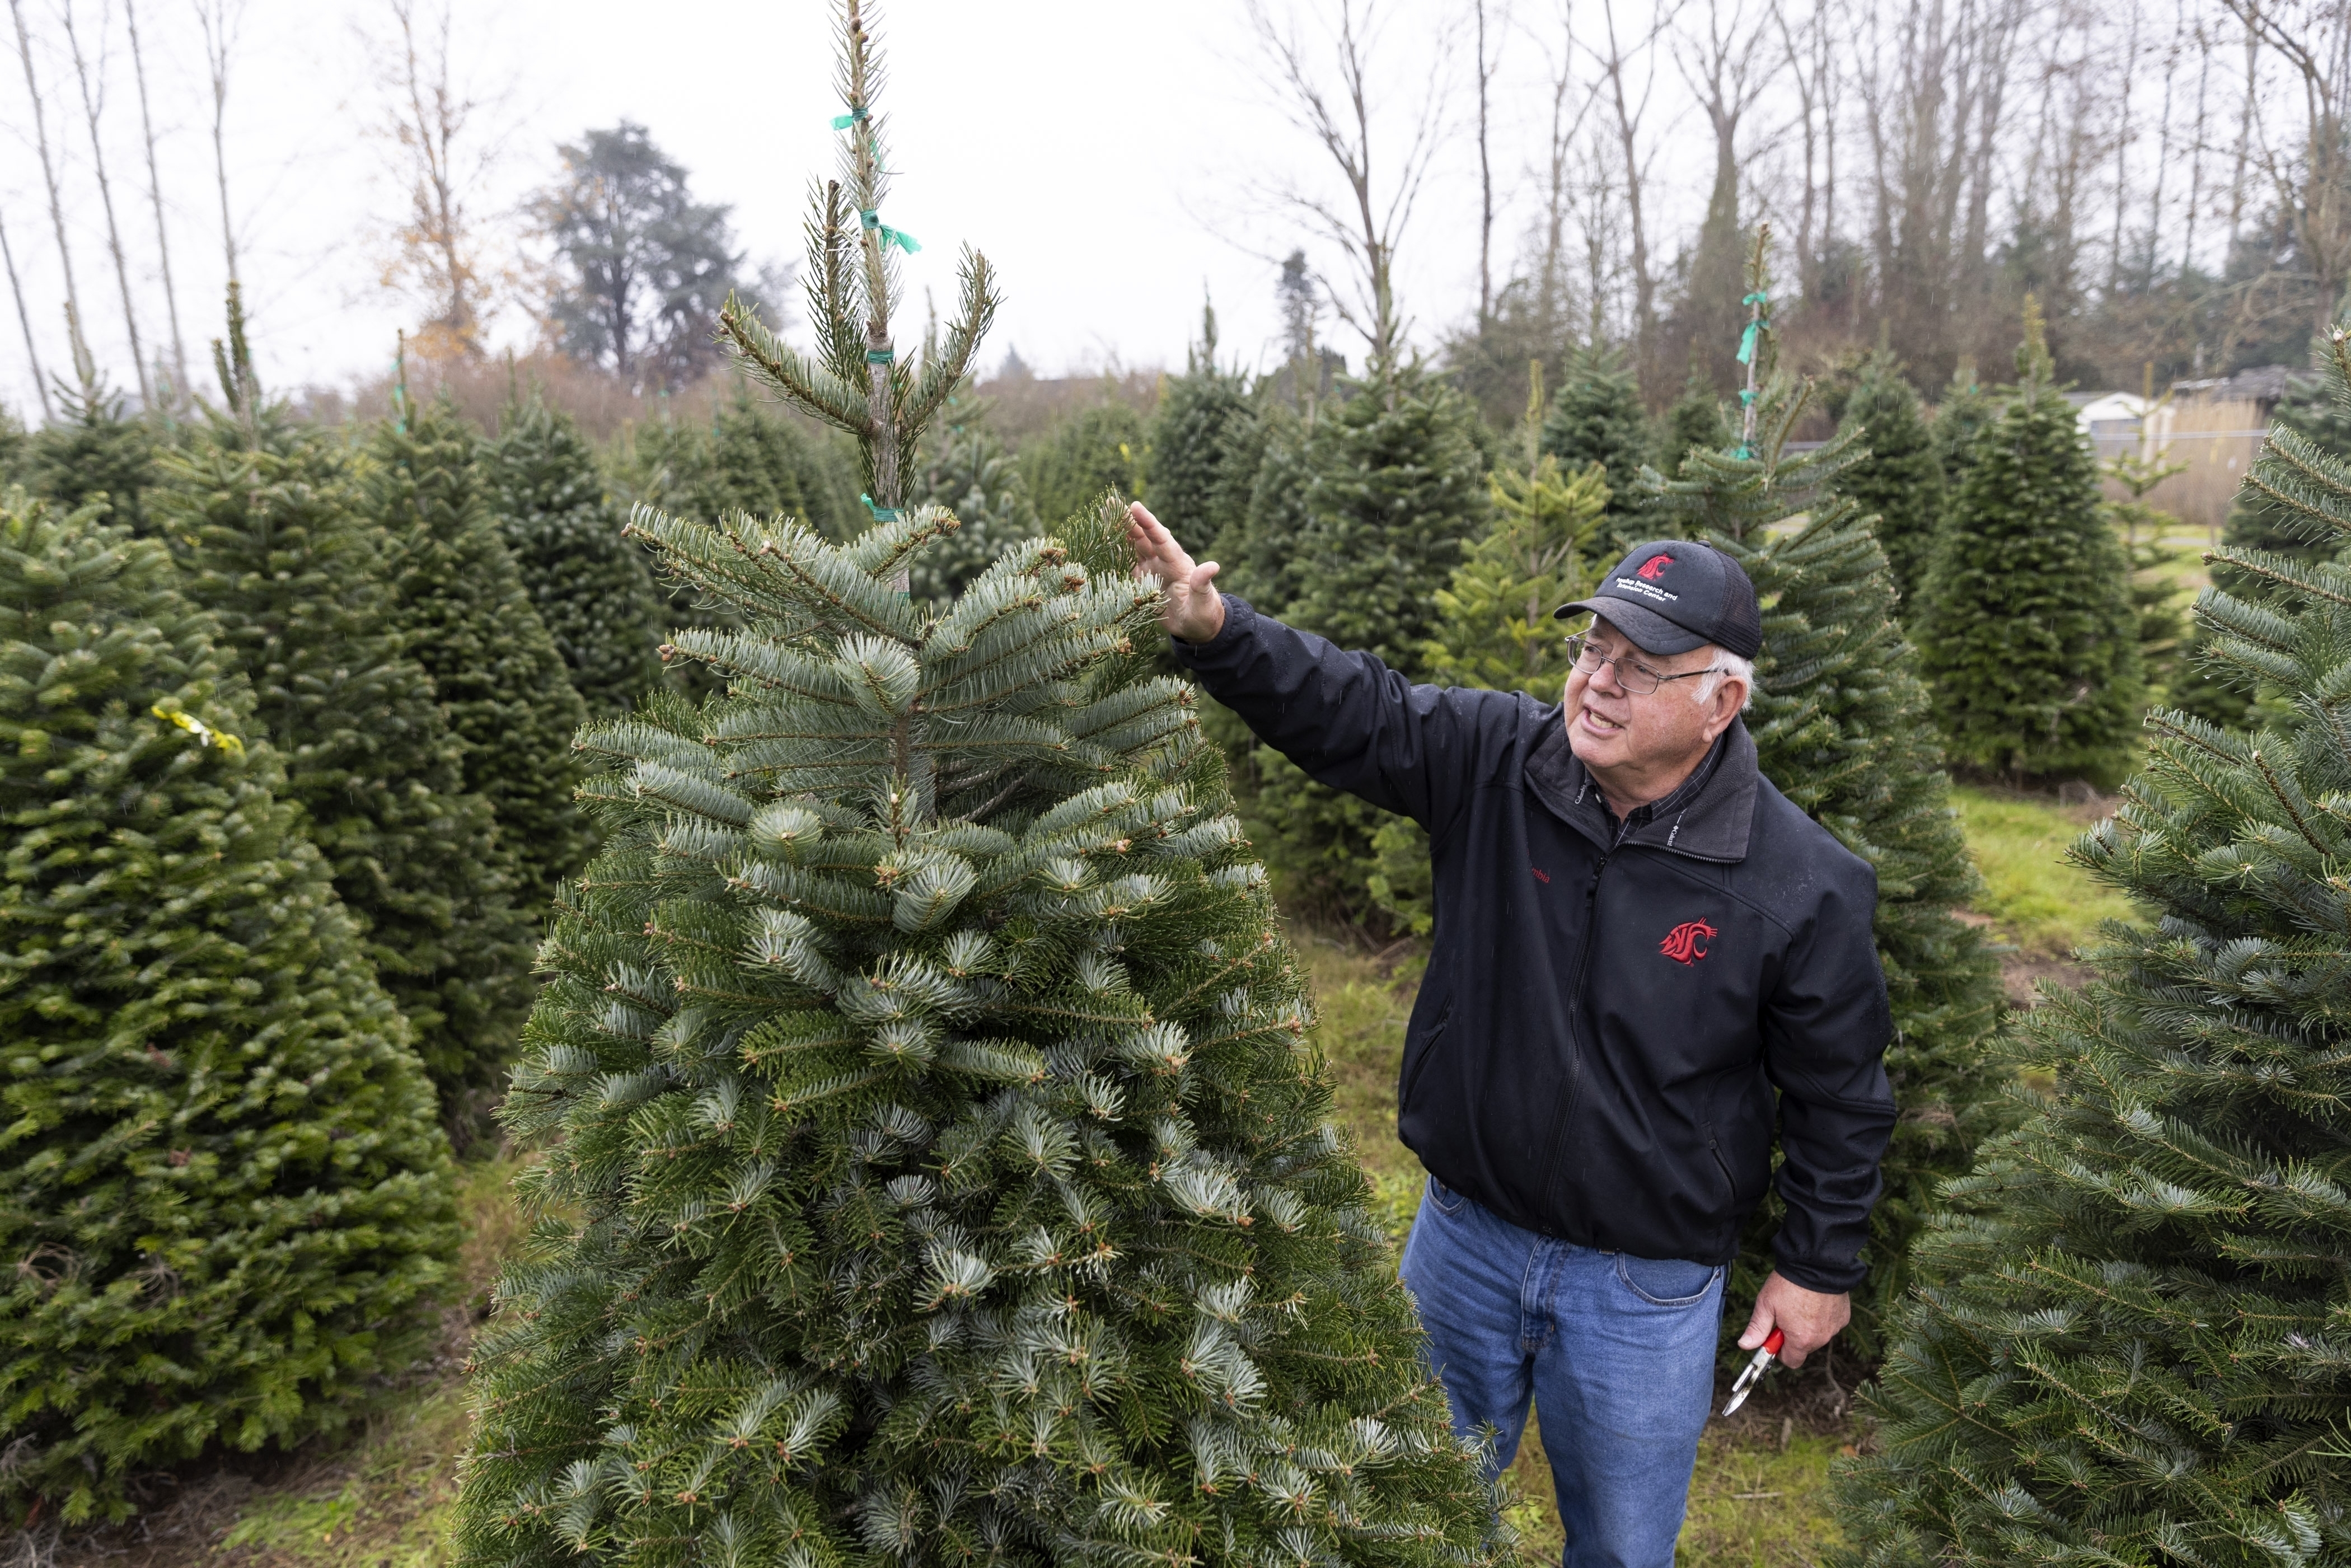 Gary Chastagner stands near a green fir tree while wearing a black WSU jacket and jeans.